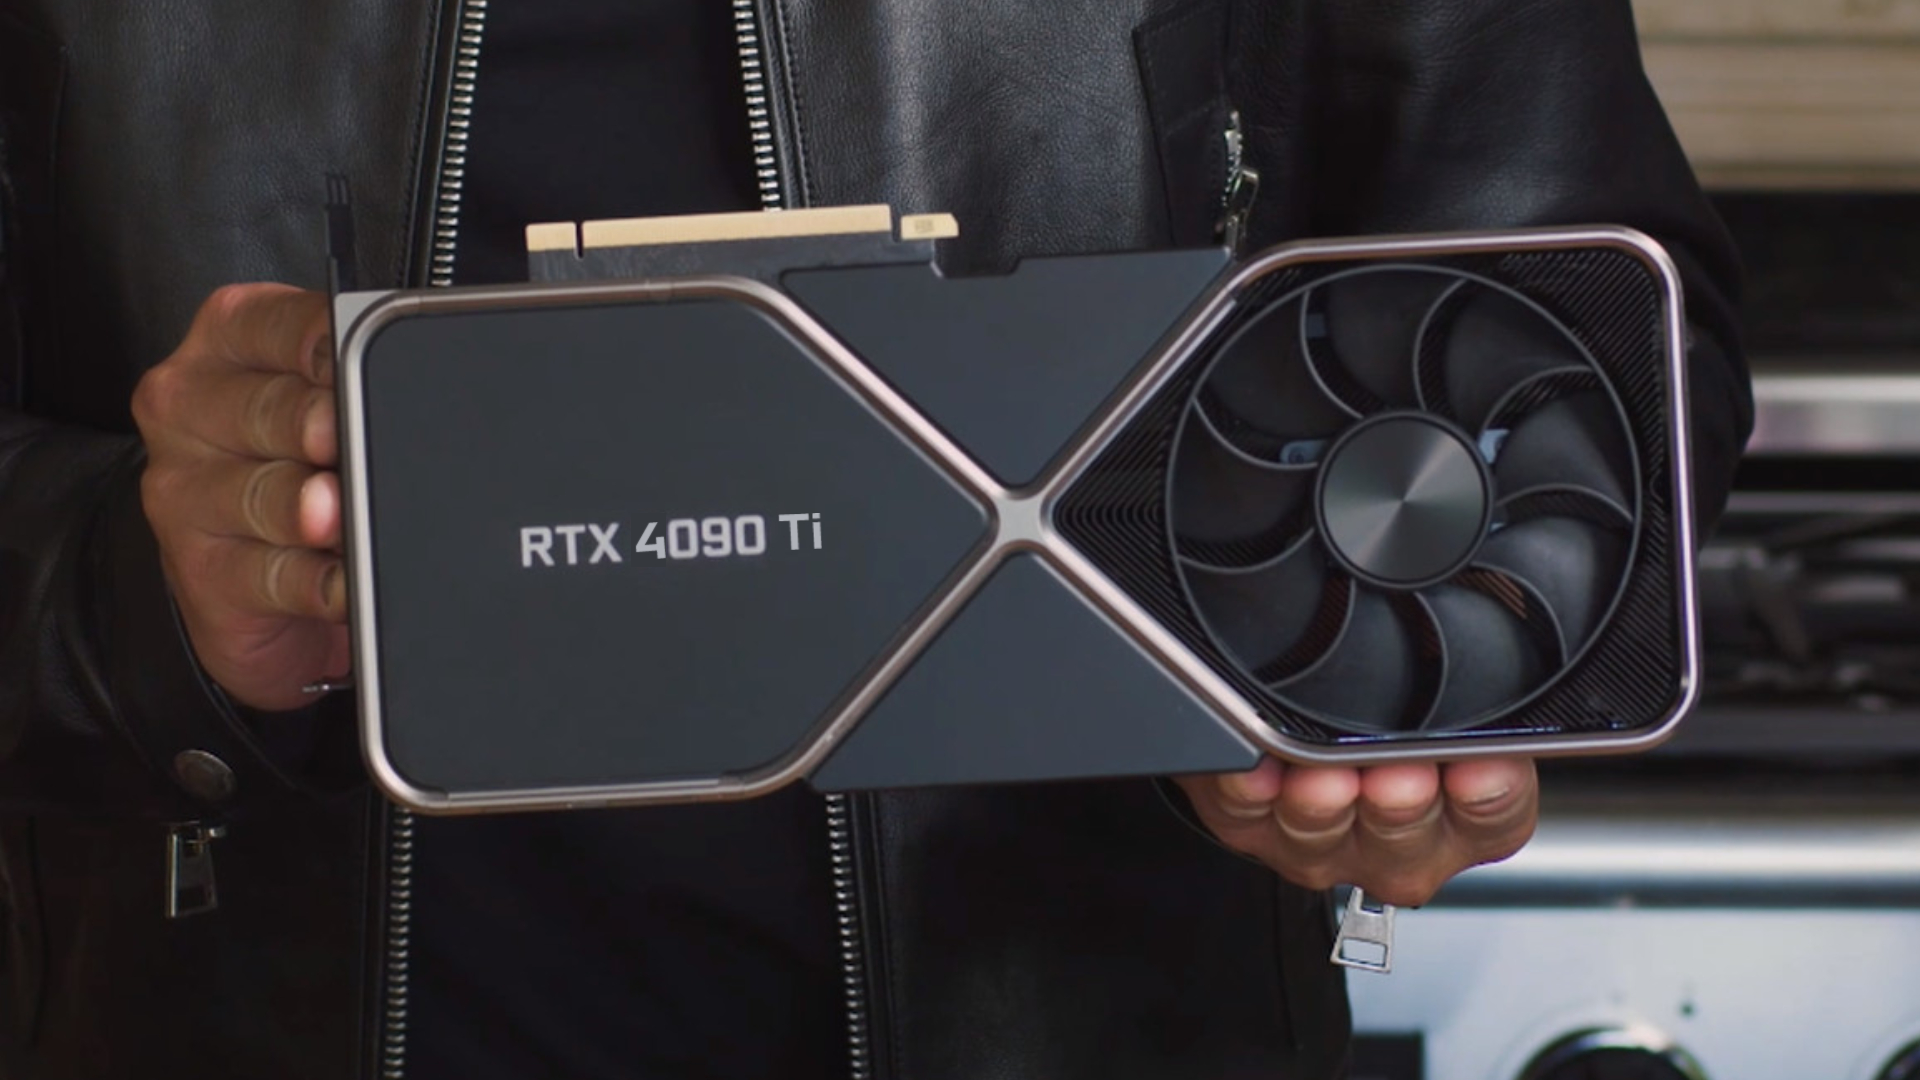 How much VRAM does RTX 4090 have?